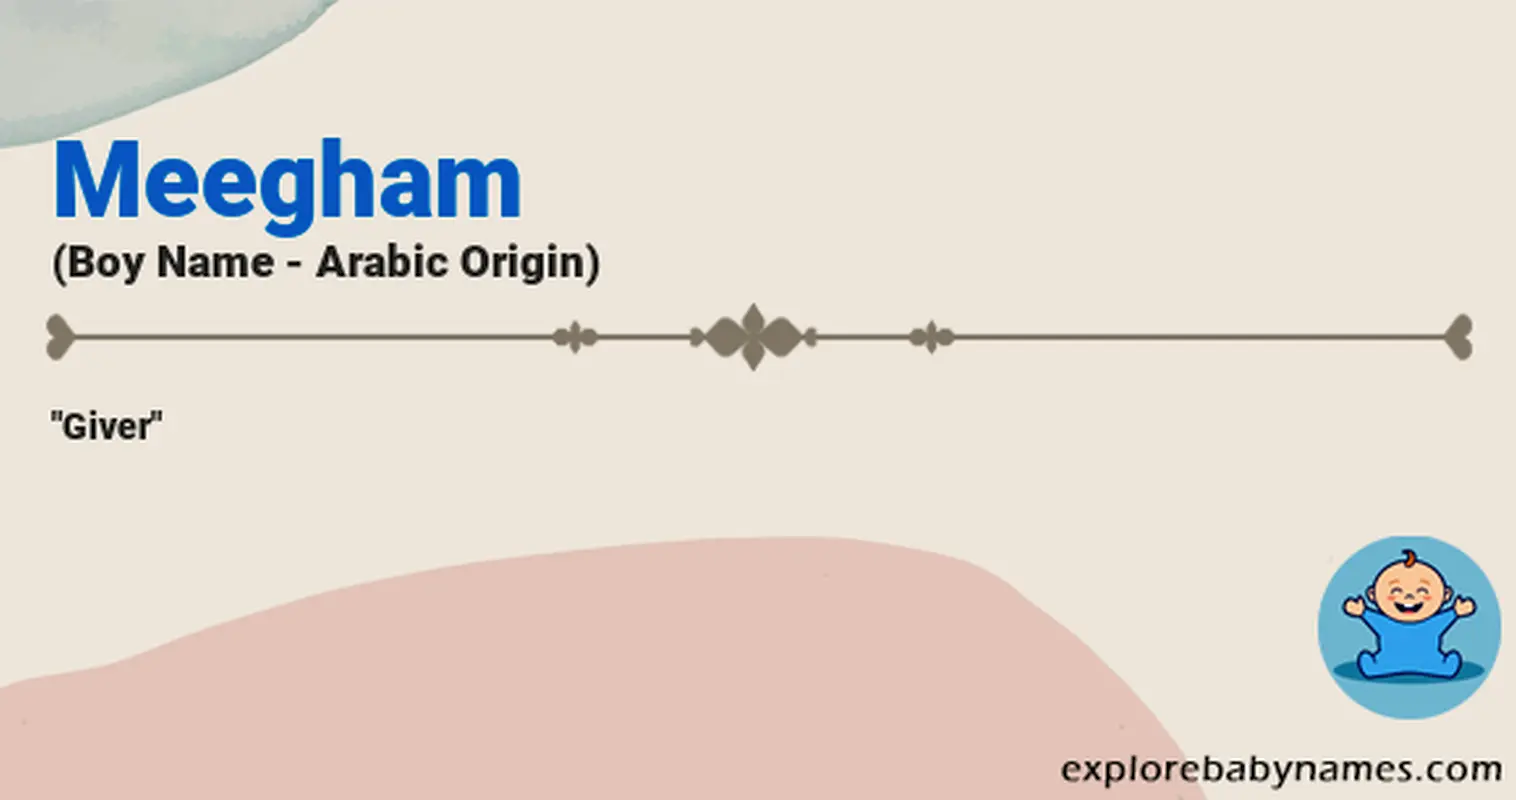 Meaning of Meegham